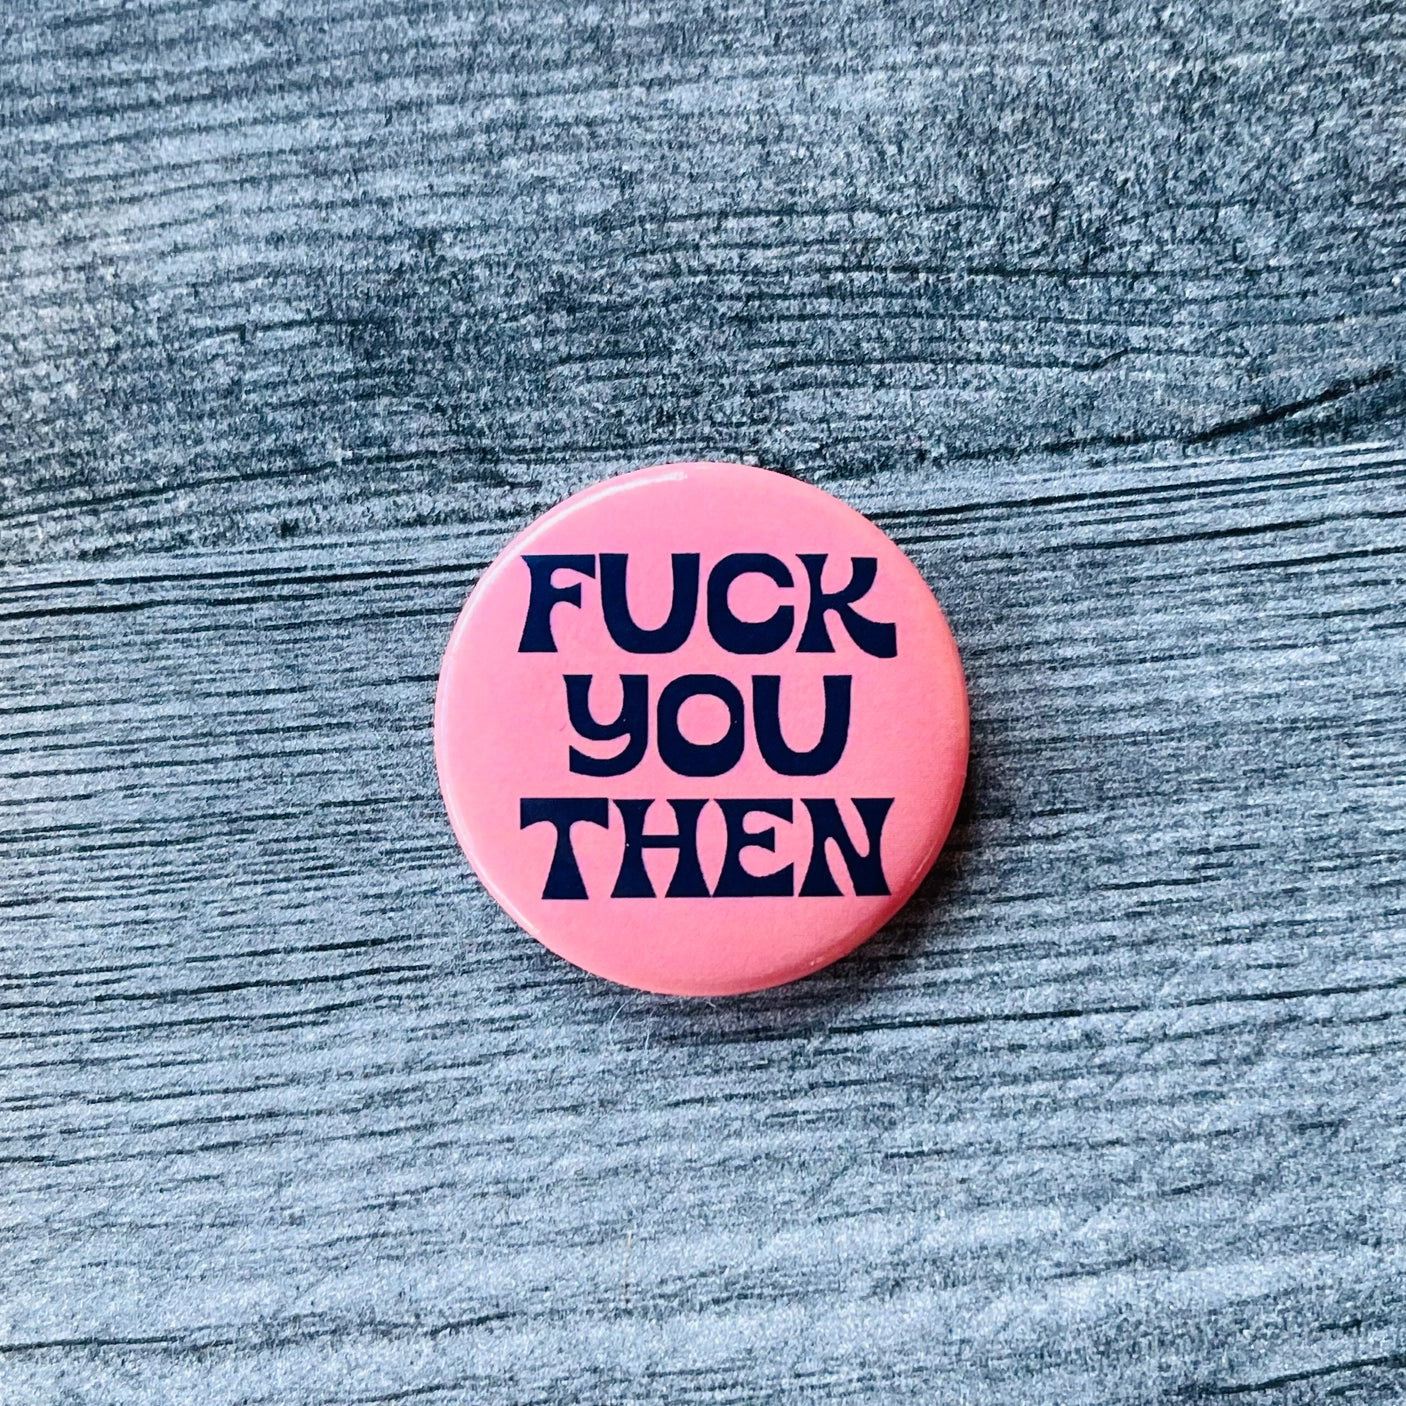 A 1 1/2” round button with a light pink background and the phrase “FUCK YOU THEN” in a curvy retro navy blue font